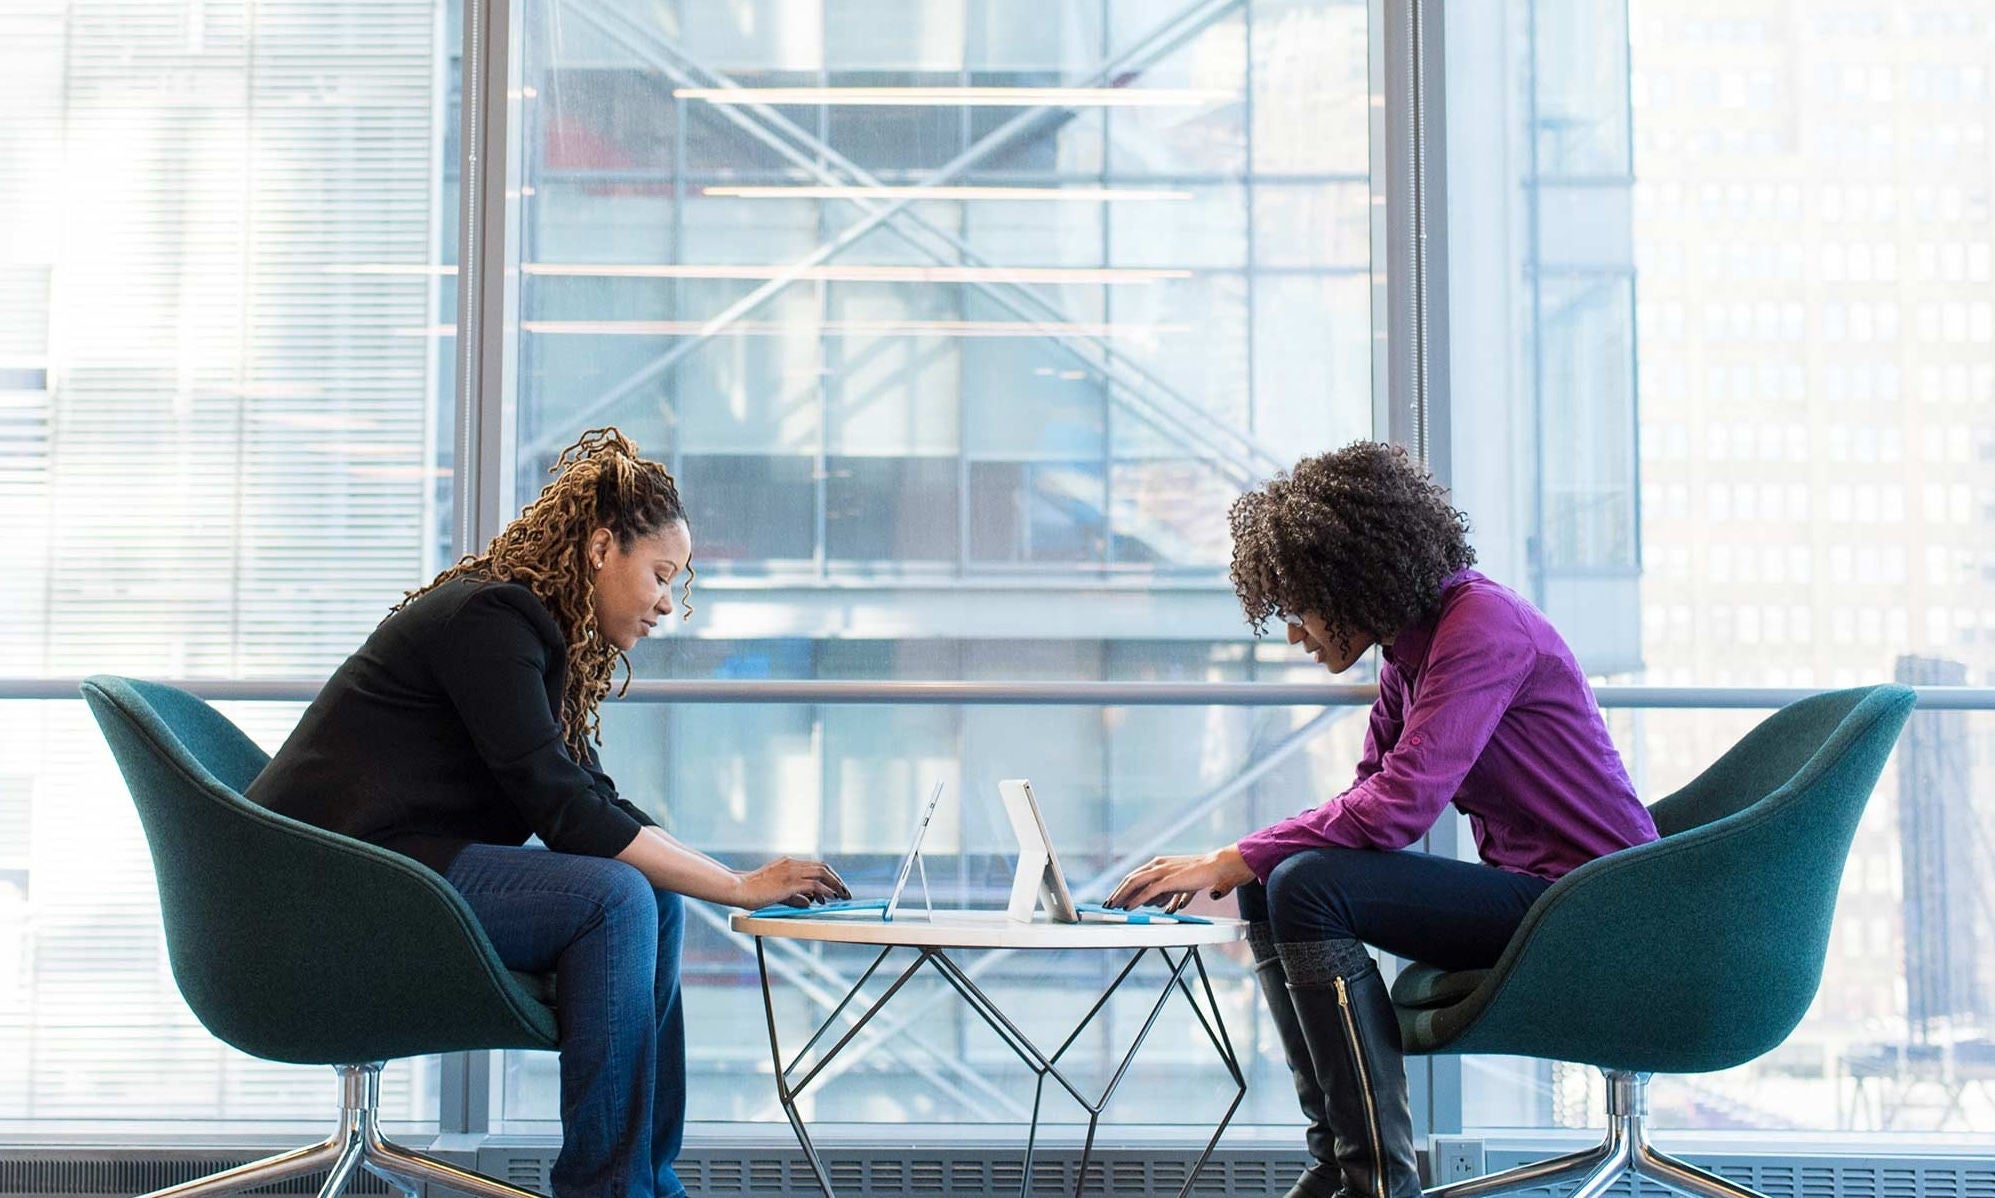 Two women working at a table in a banking instituation